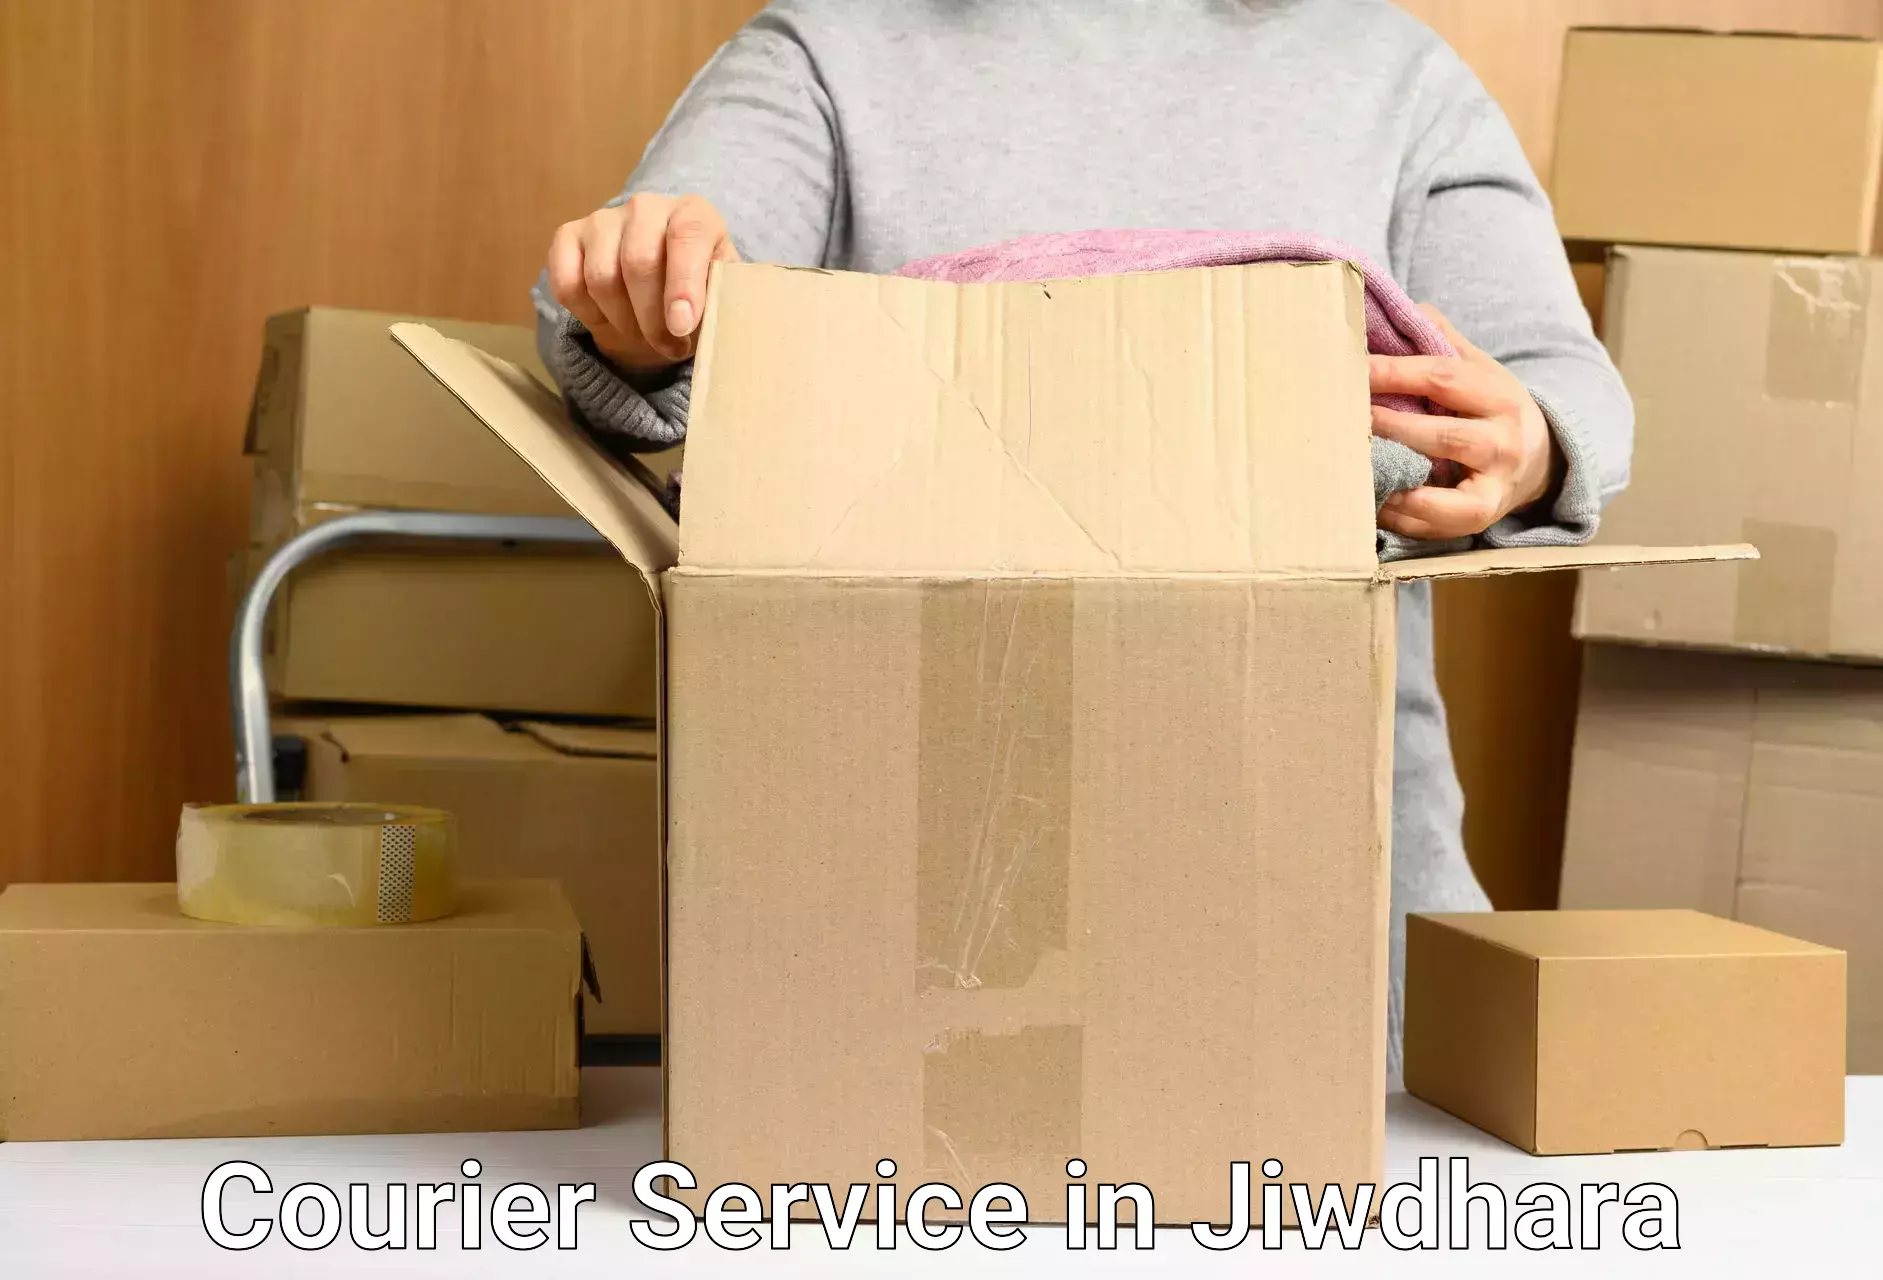 Parcel service for businesses in Jiwdhara